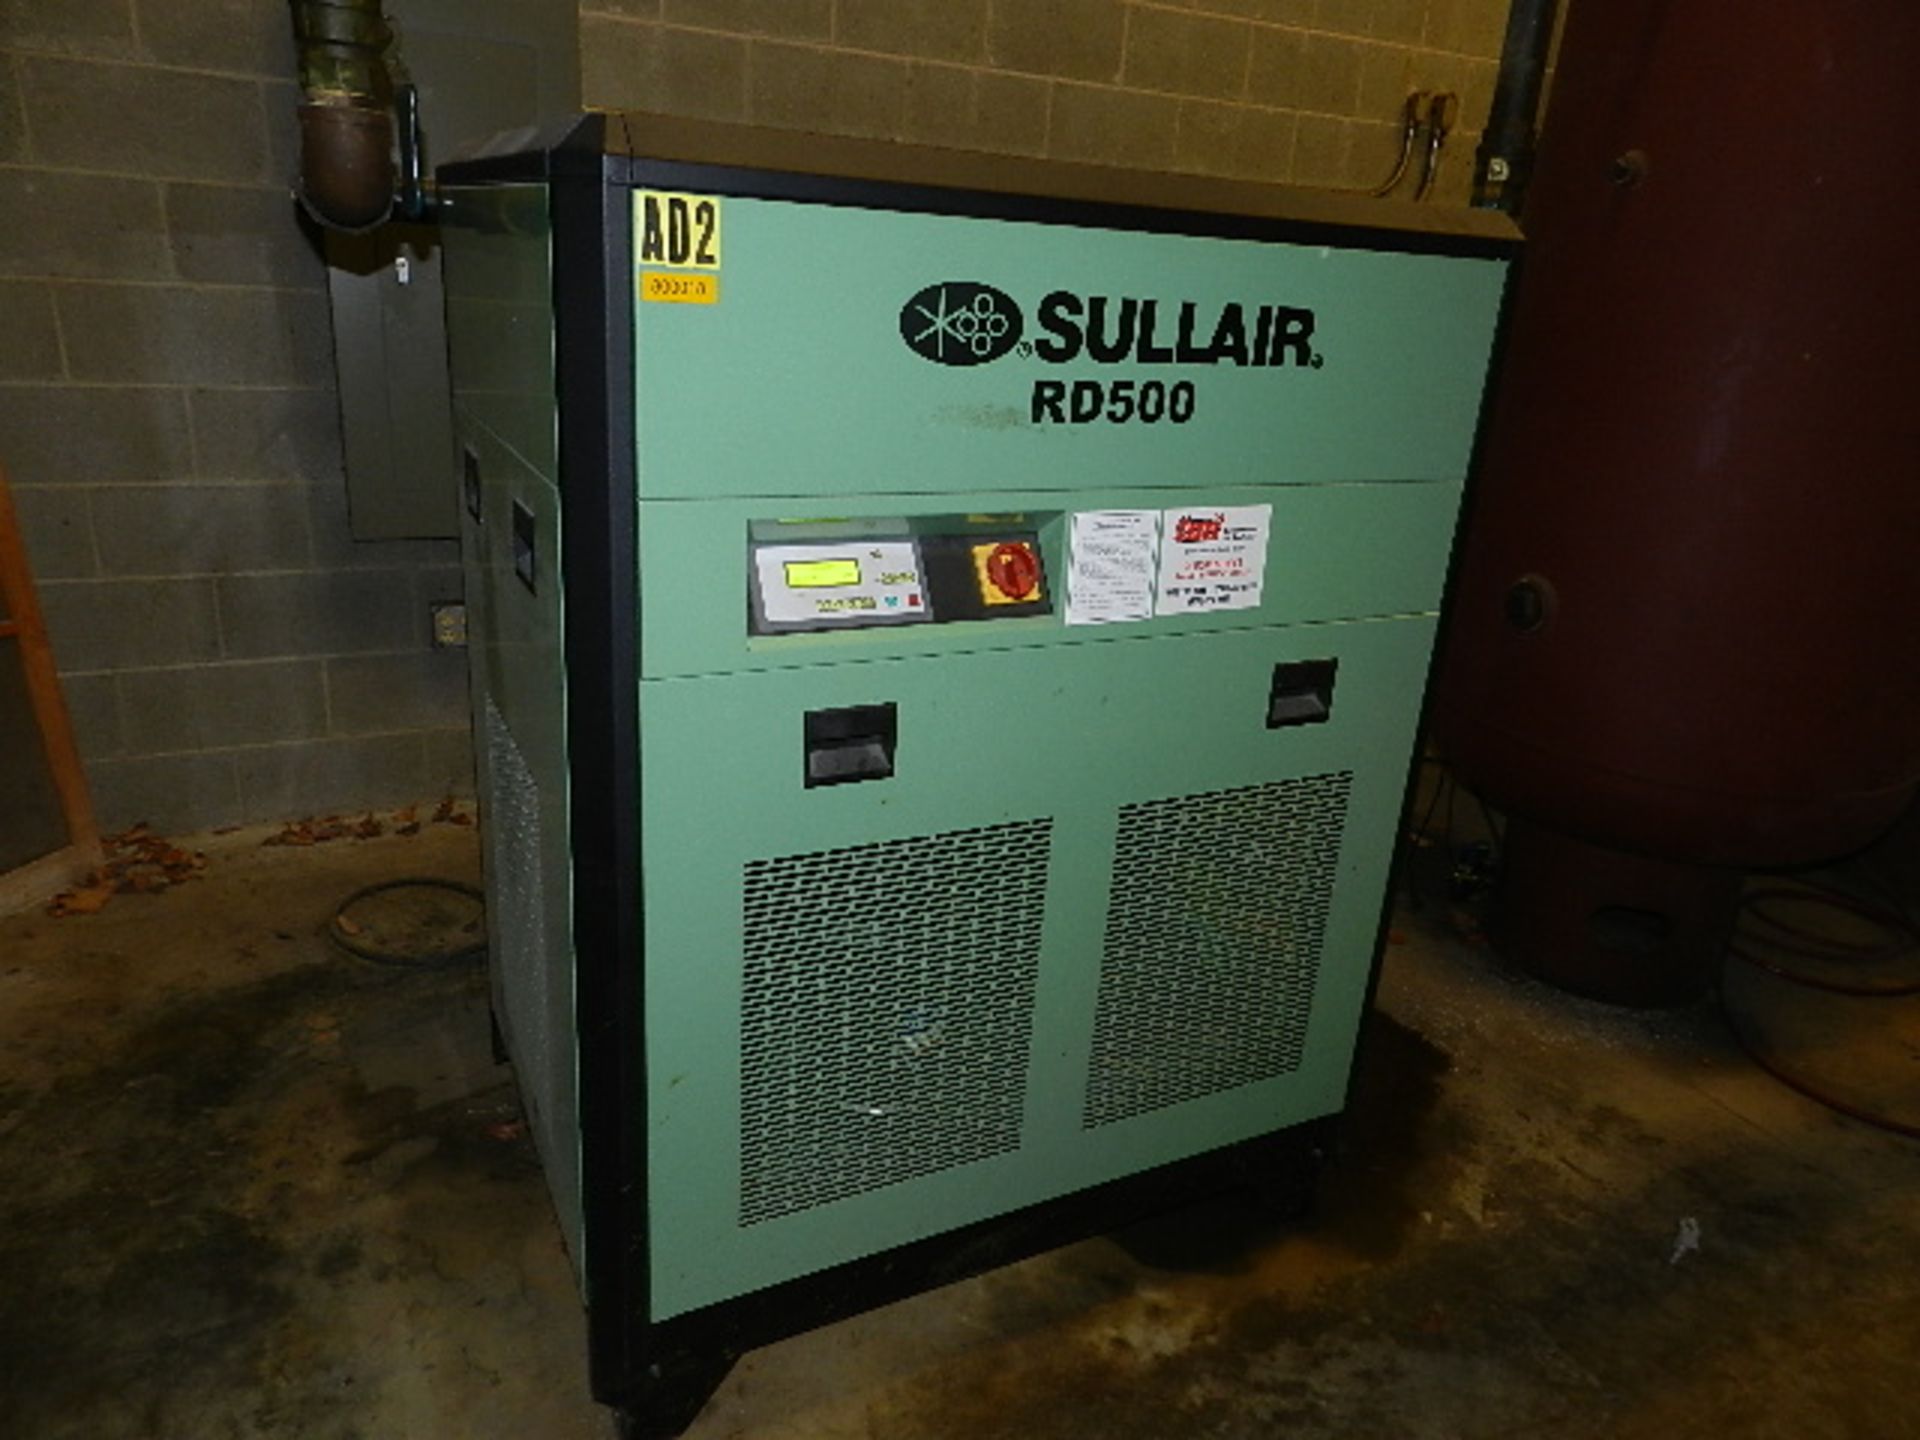 Sullair air dryer, model RD-500-460-3-60-A, 460 volt, 3 phase, 230 psi, includes tank, 17,114